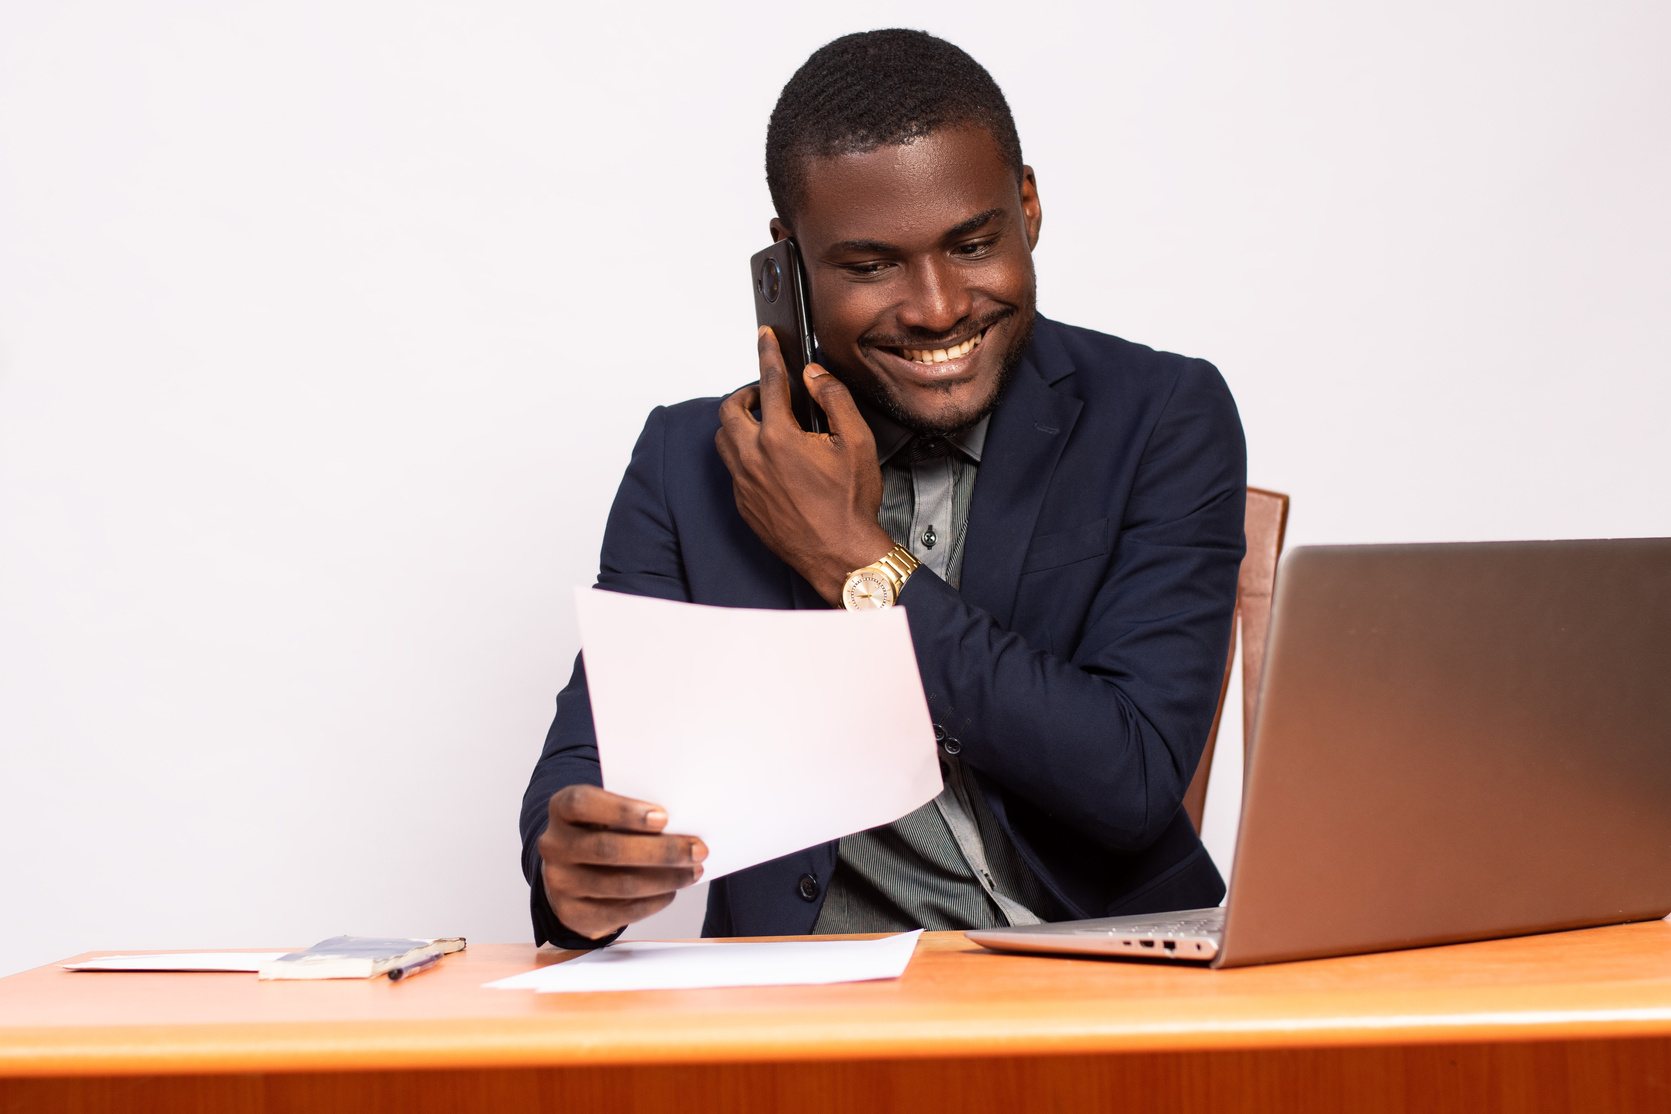 african business man making a phone call while working